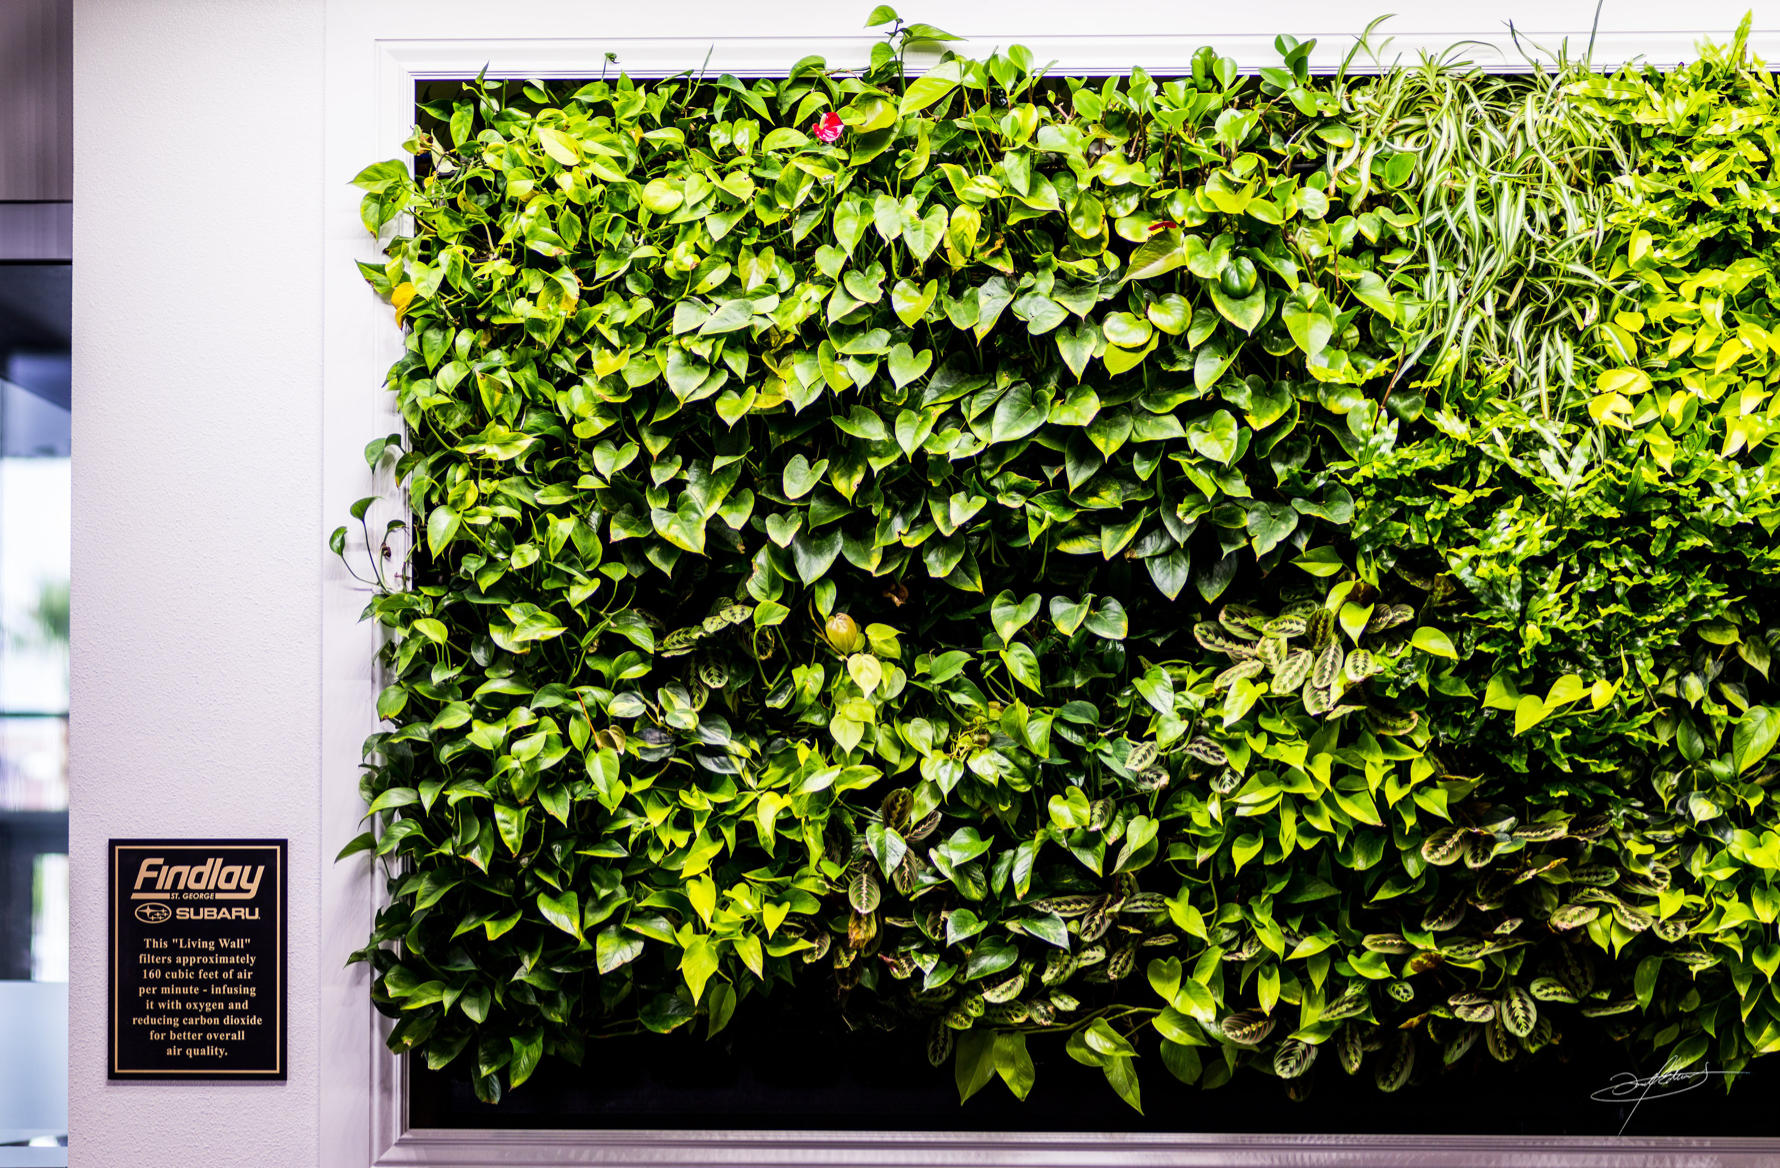 A stunning and lush living wall next to a wall plaque in a findlay subaru